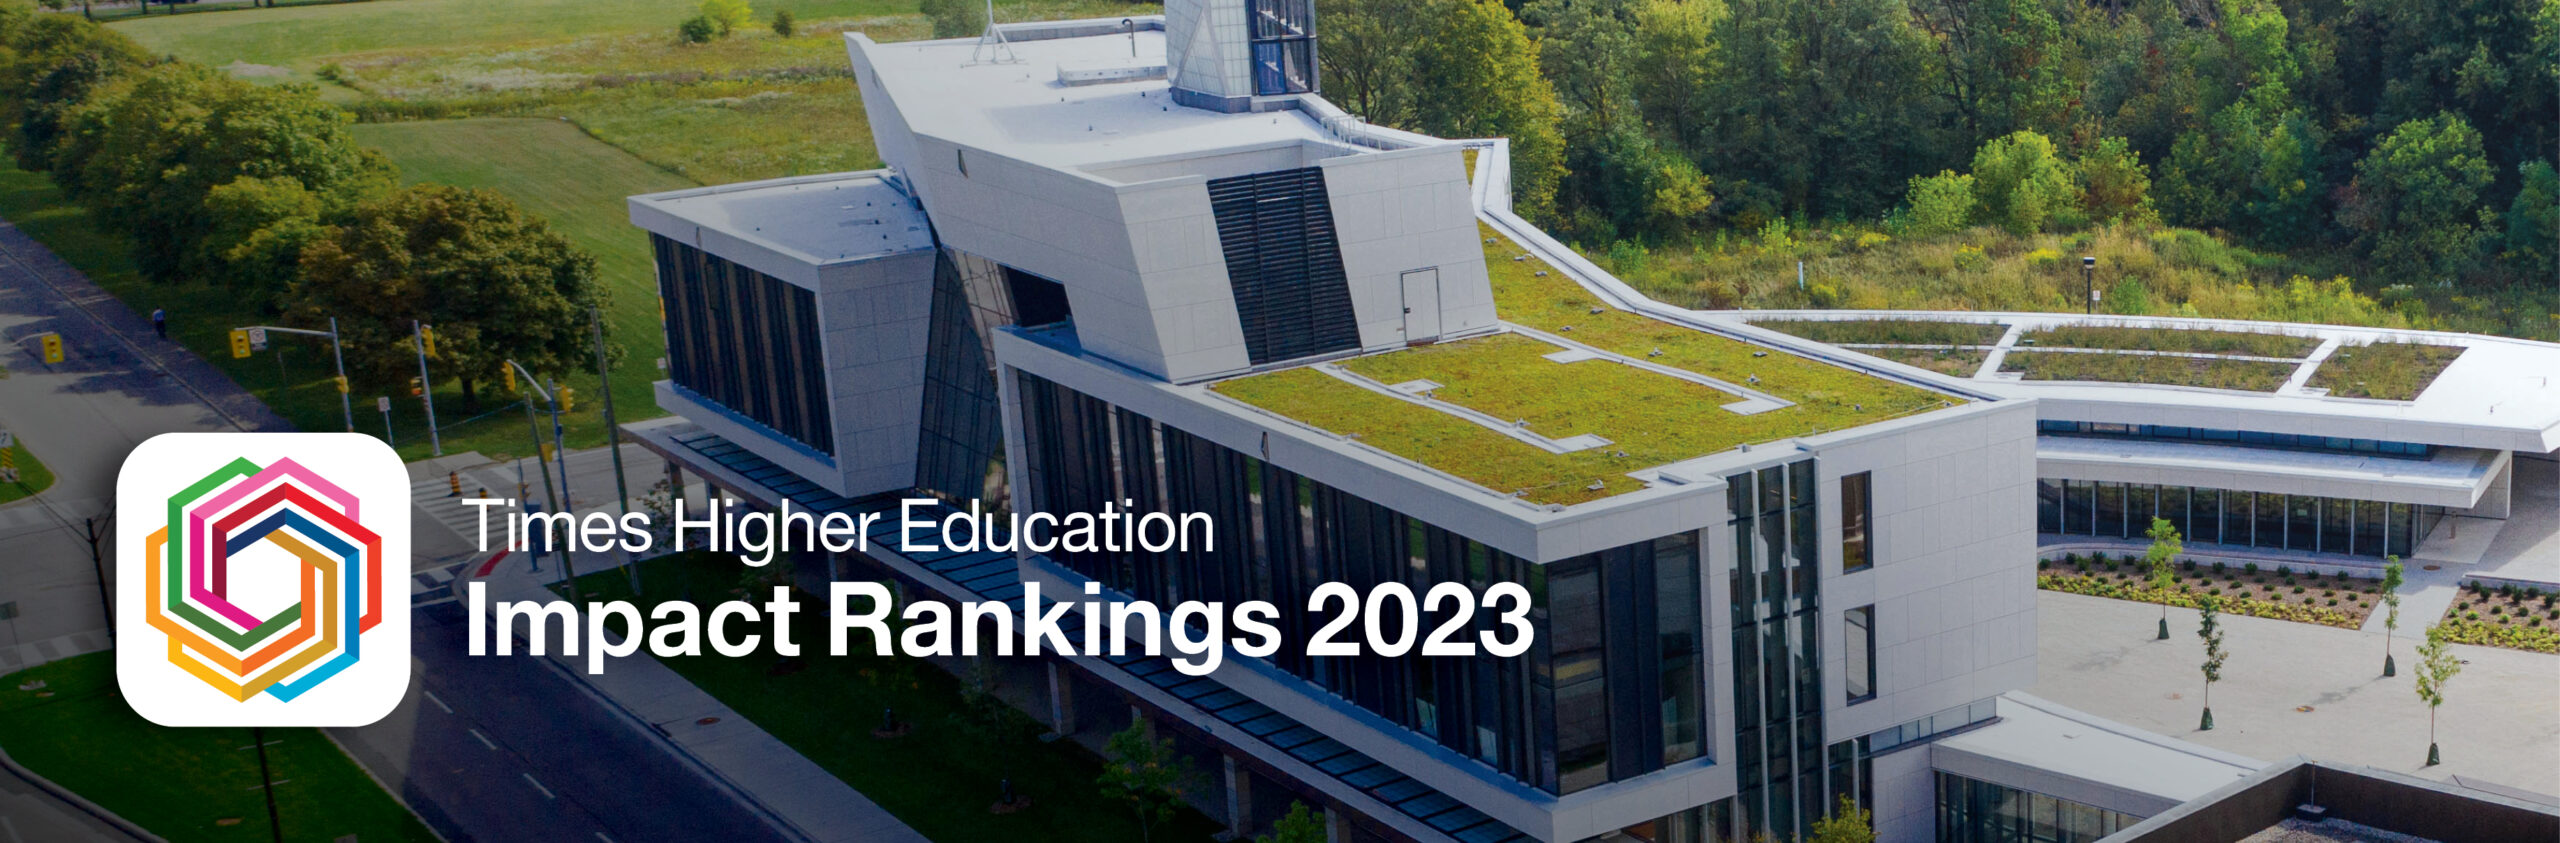 Times Higher Education Impact Rankings banner